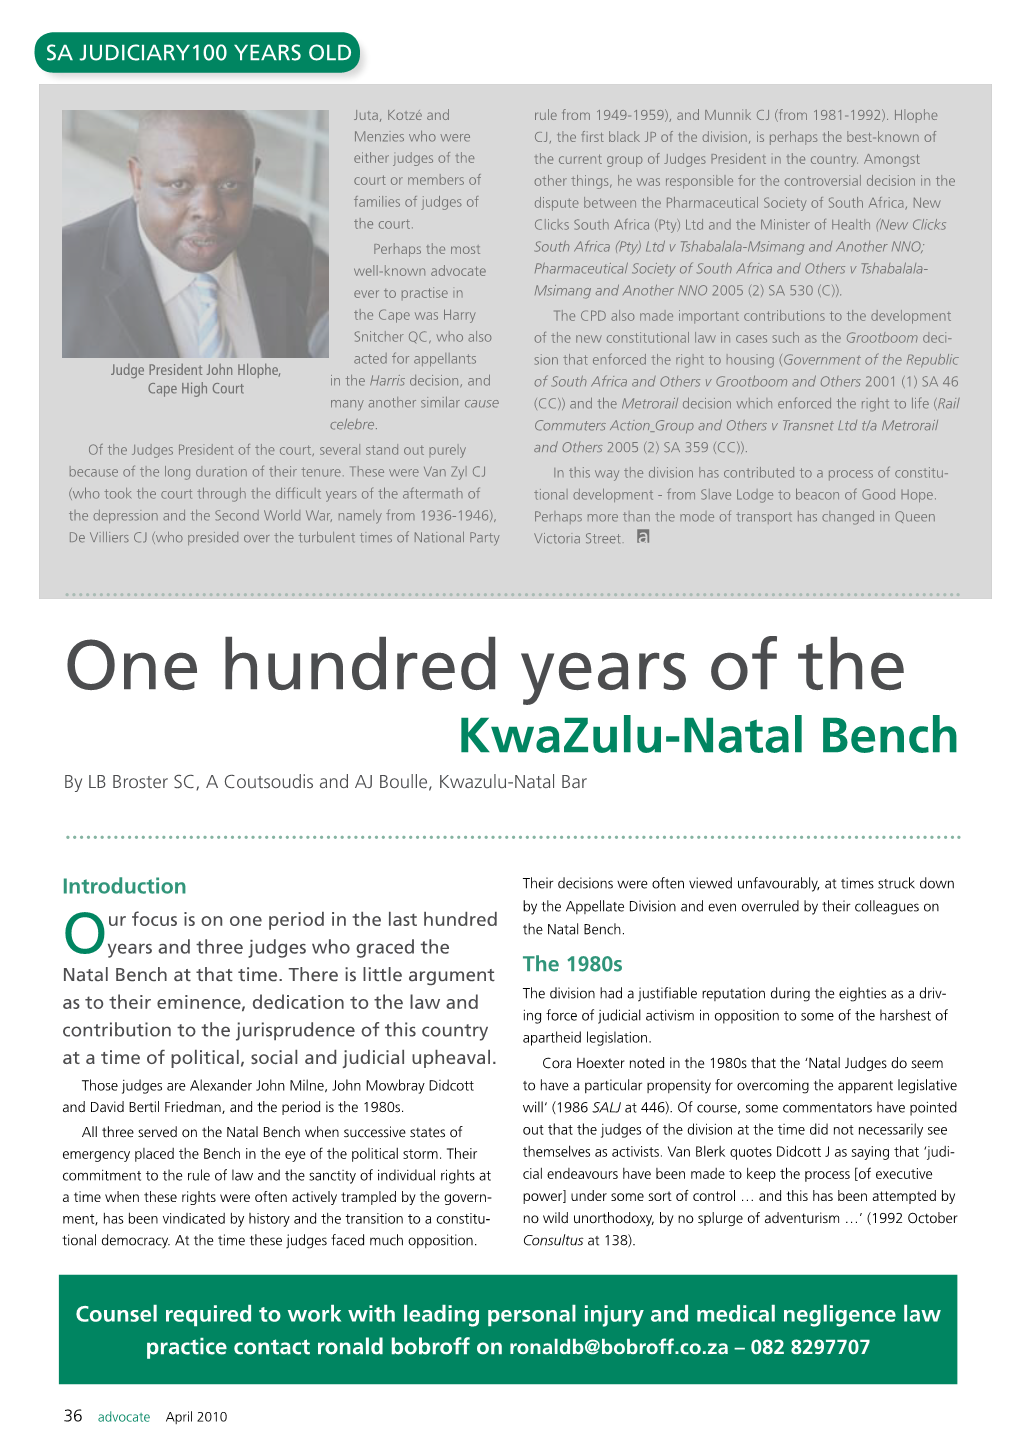 One Hundred Years of the Kwazulu-Natal Bench by LB Broster SC, a Coutsoudis and AJ Boulle, Kwazulu-Natal Bar